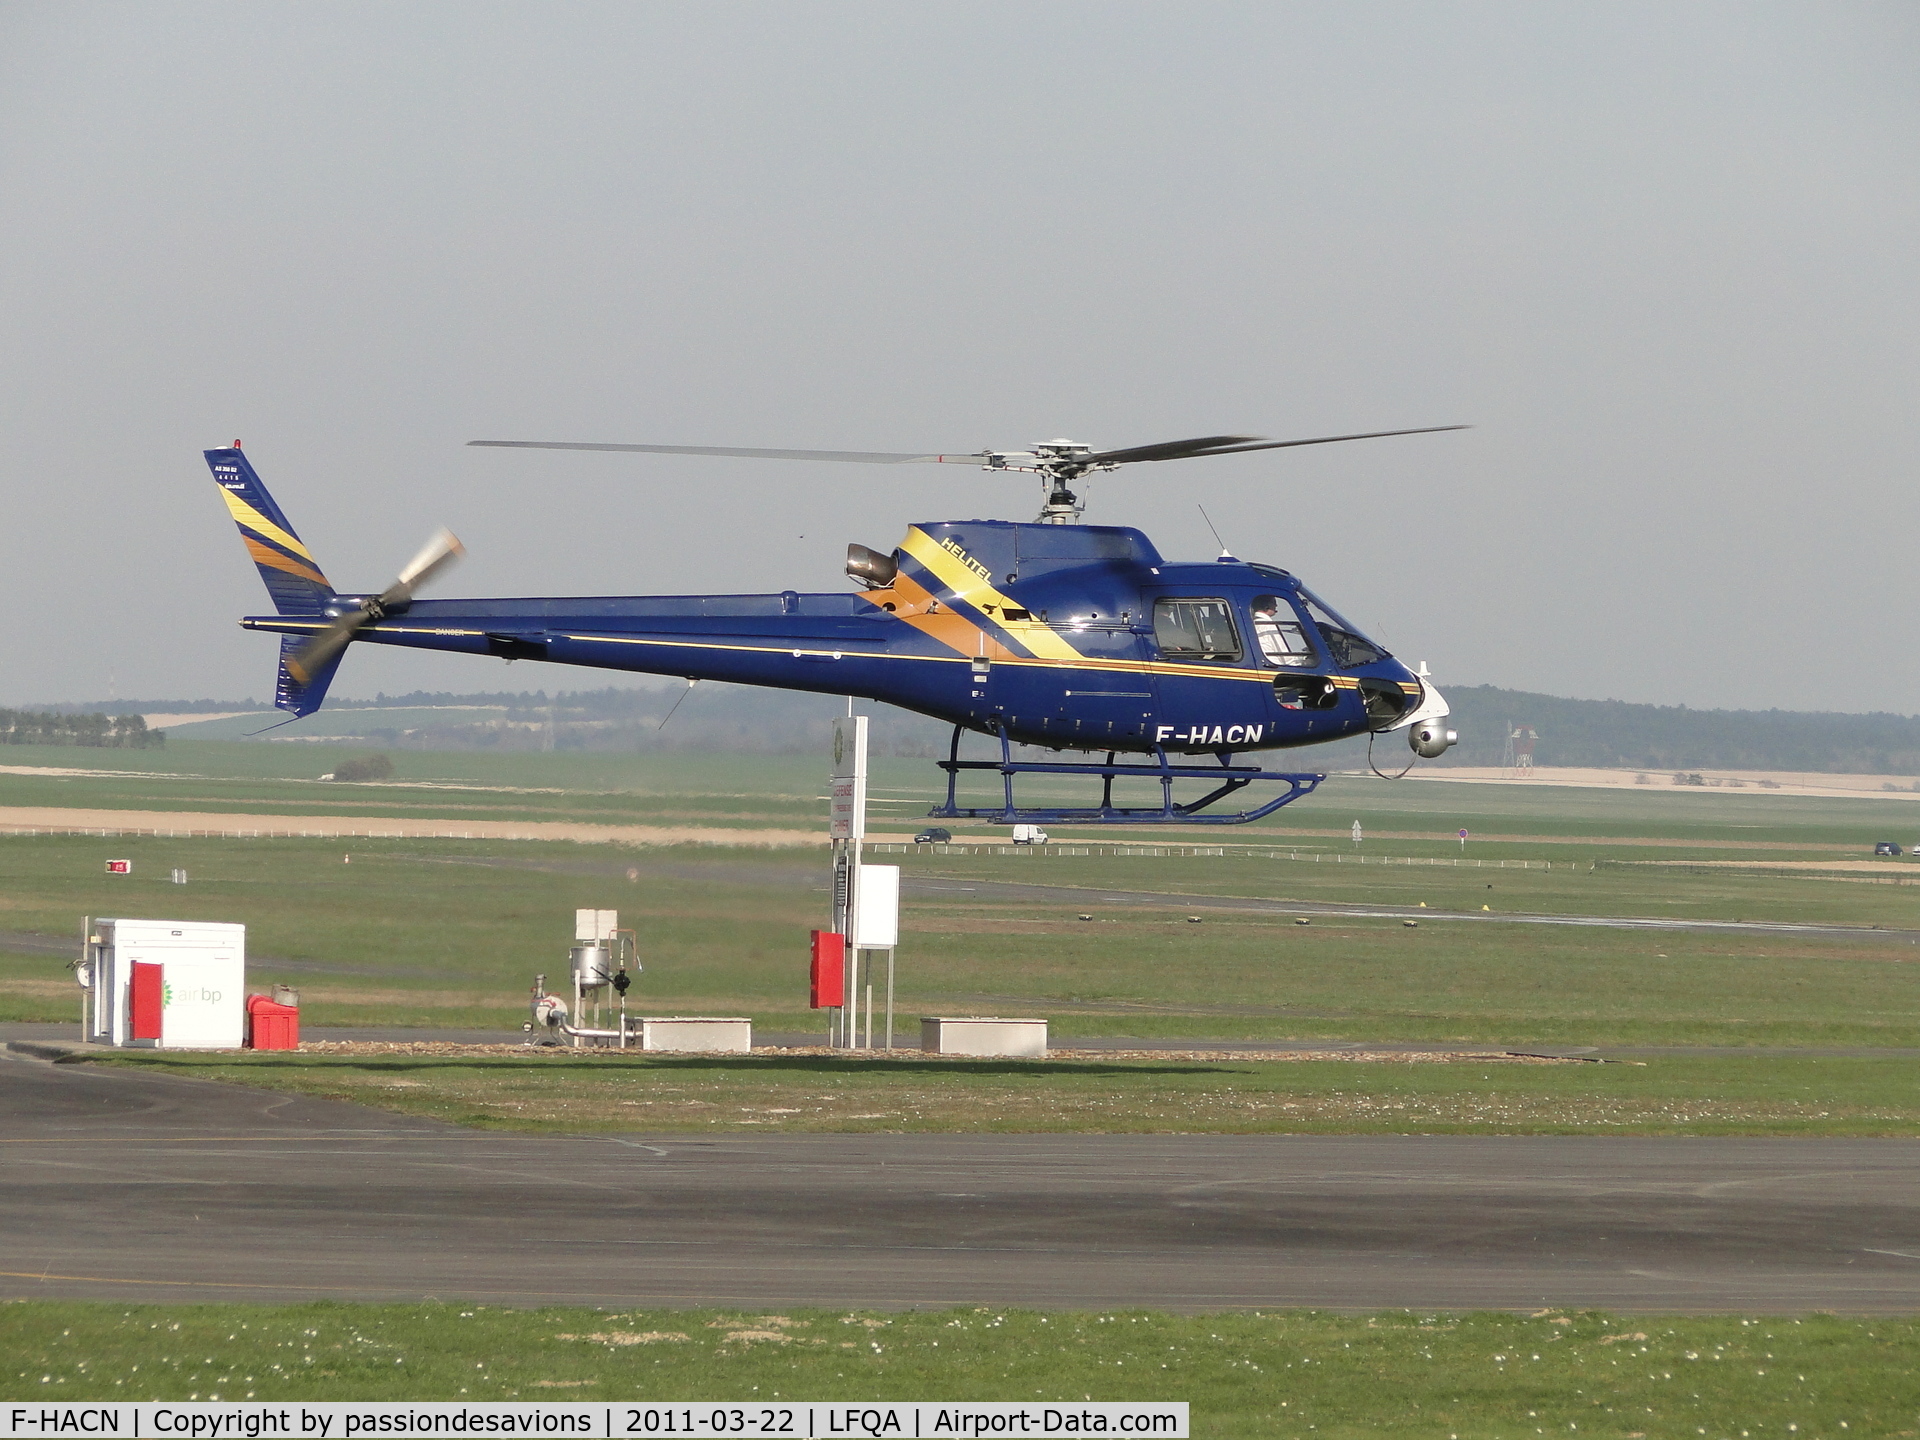 F-HACN, 2008 Eurocopter AS-350B-2 Ecureuil Ecureuil C/N 4415, Just taking-off  from Reims-Prunay after refuelling